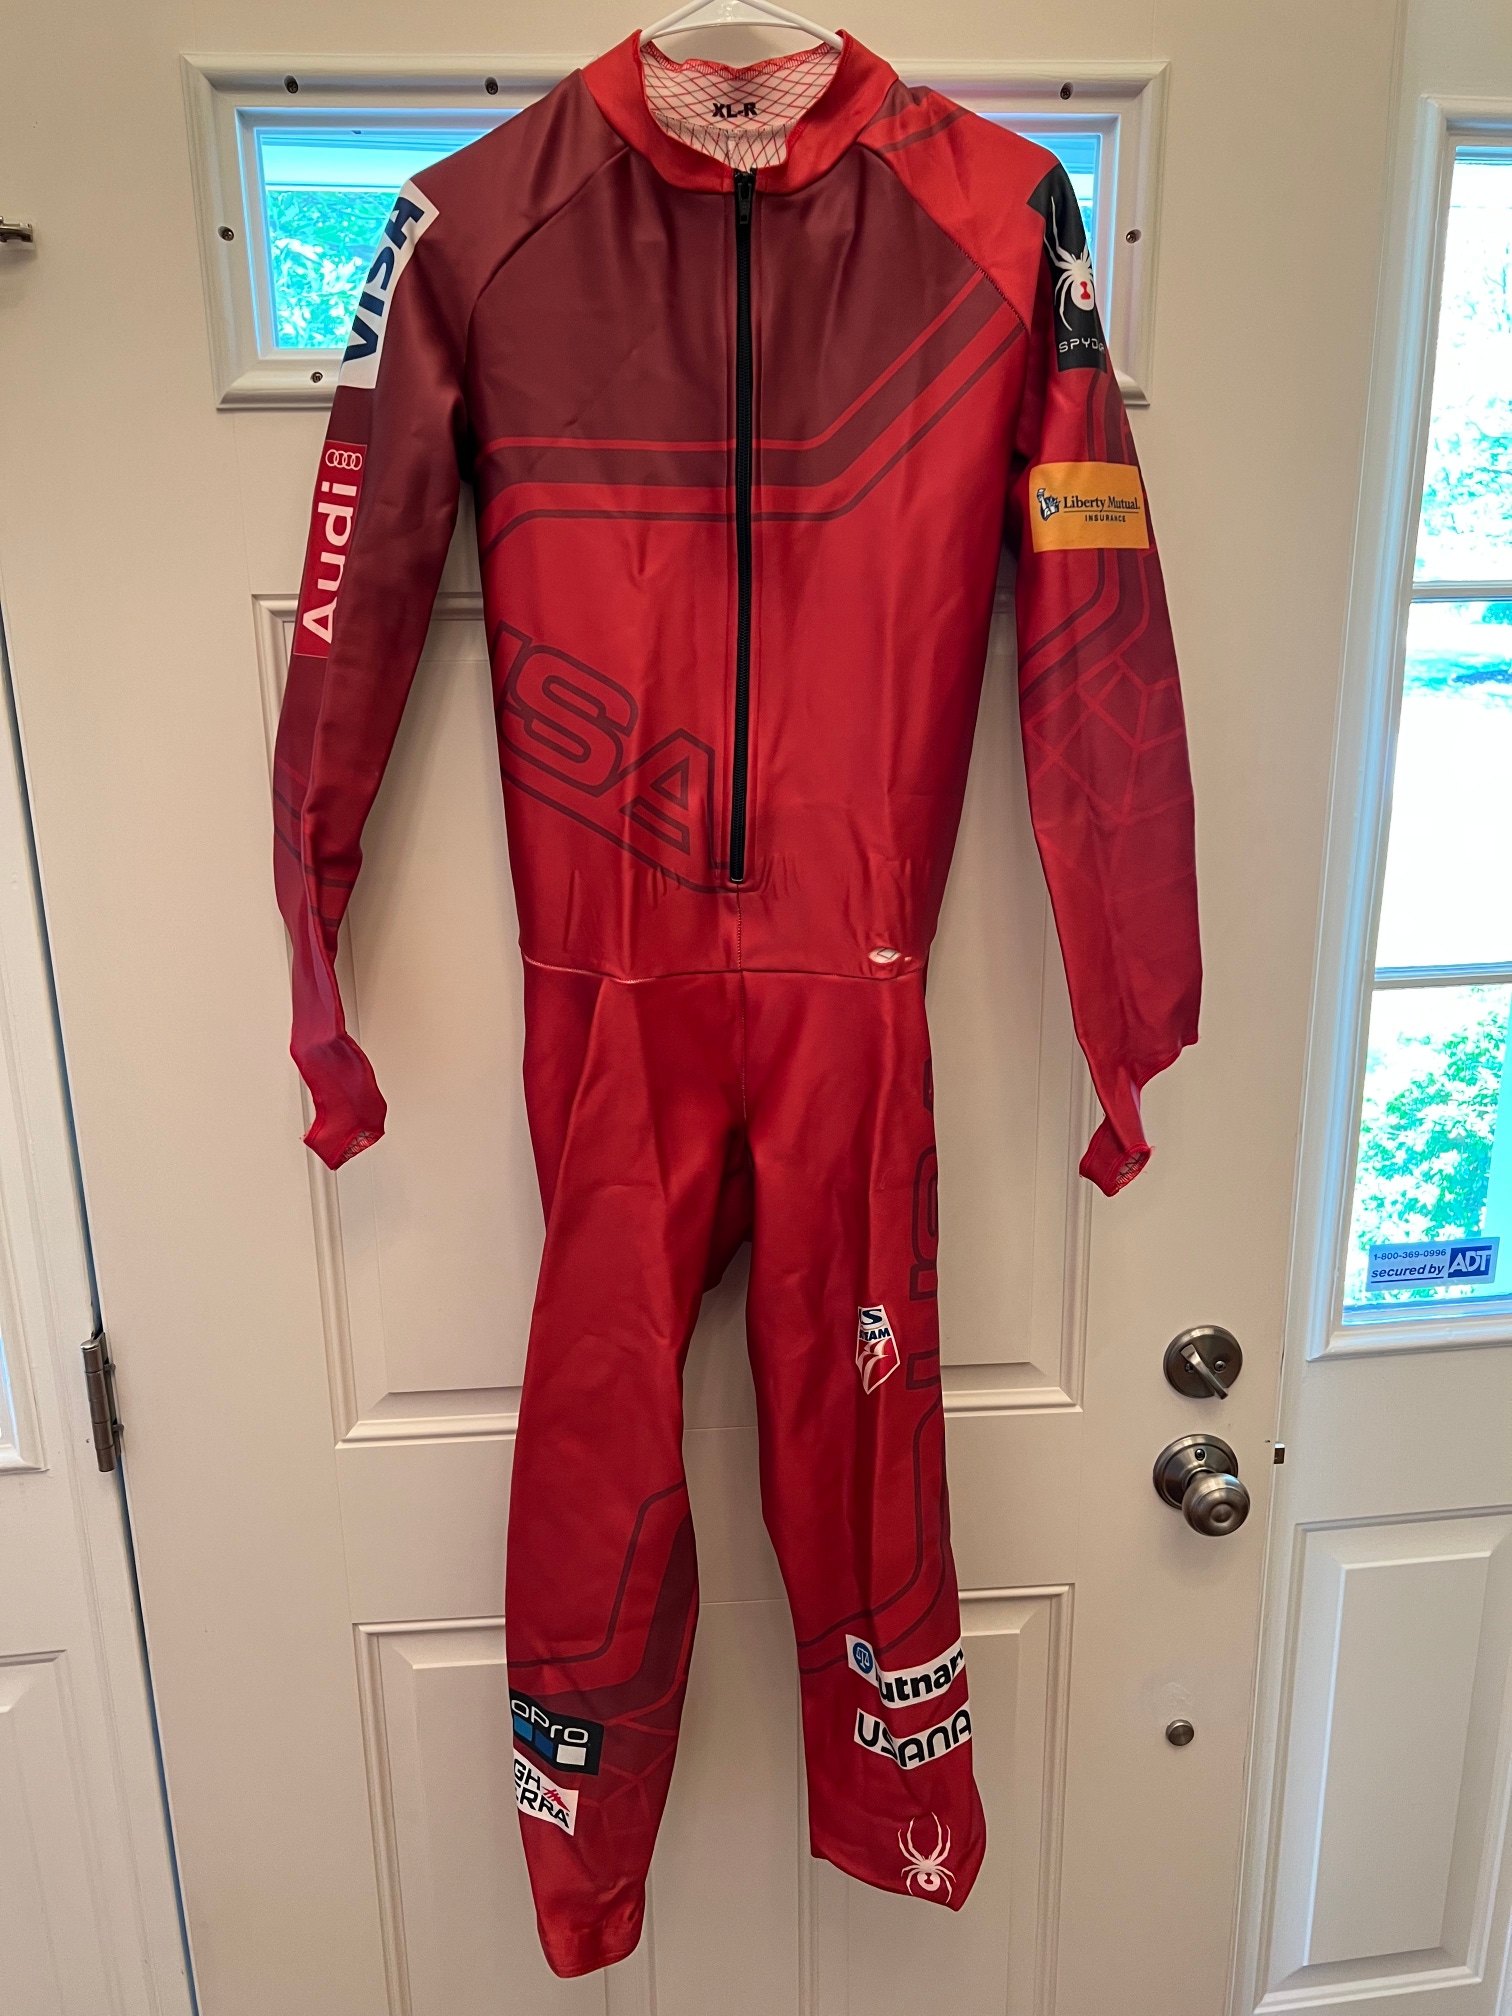 US Team Men's Used XL Spyder Non-Padded Ski Suit FIS Legal